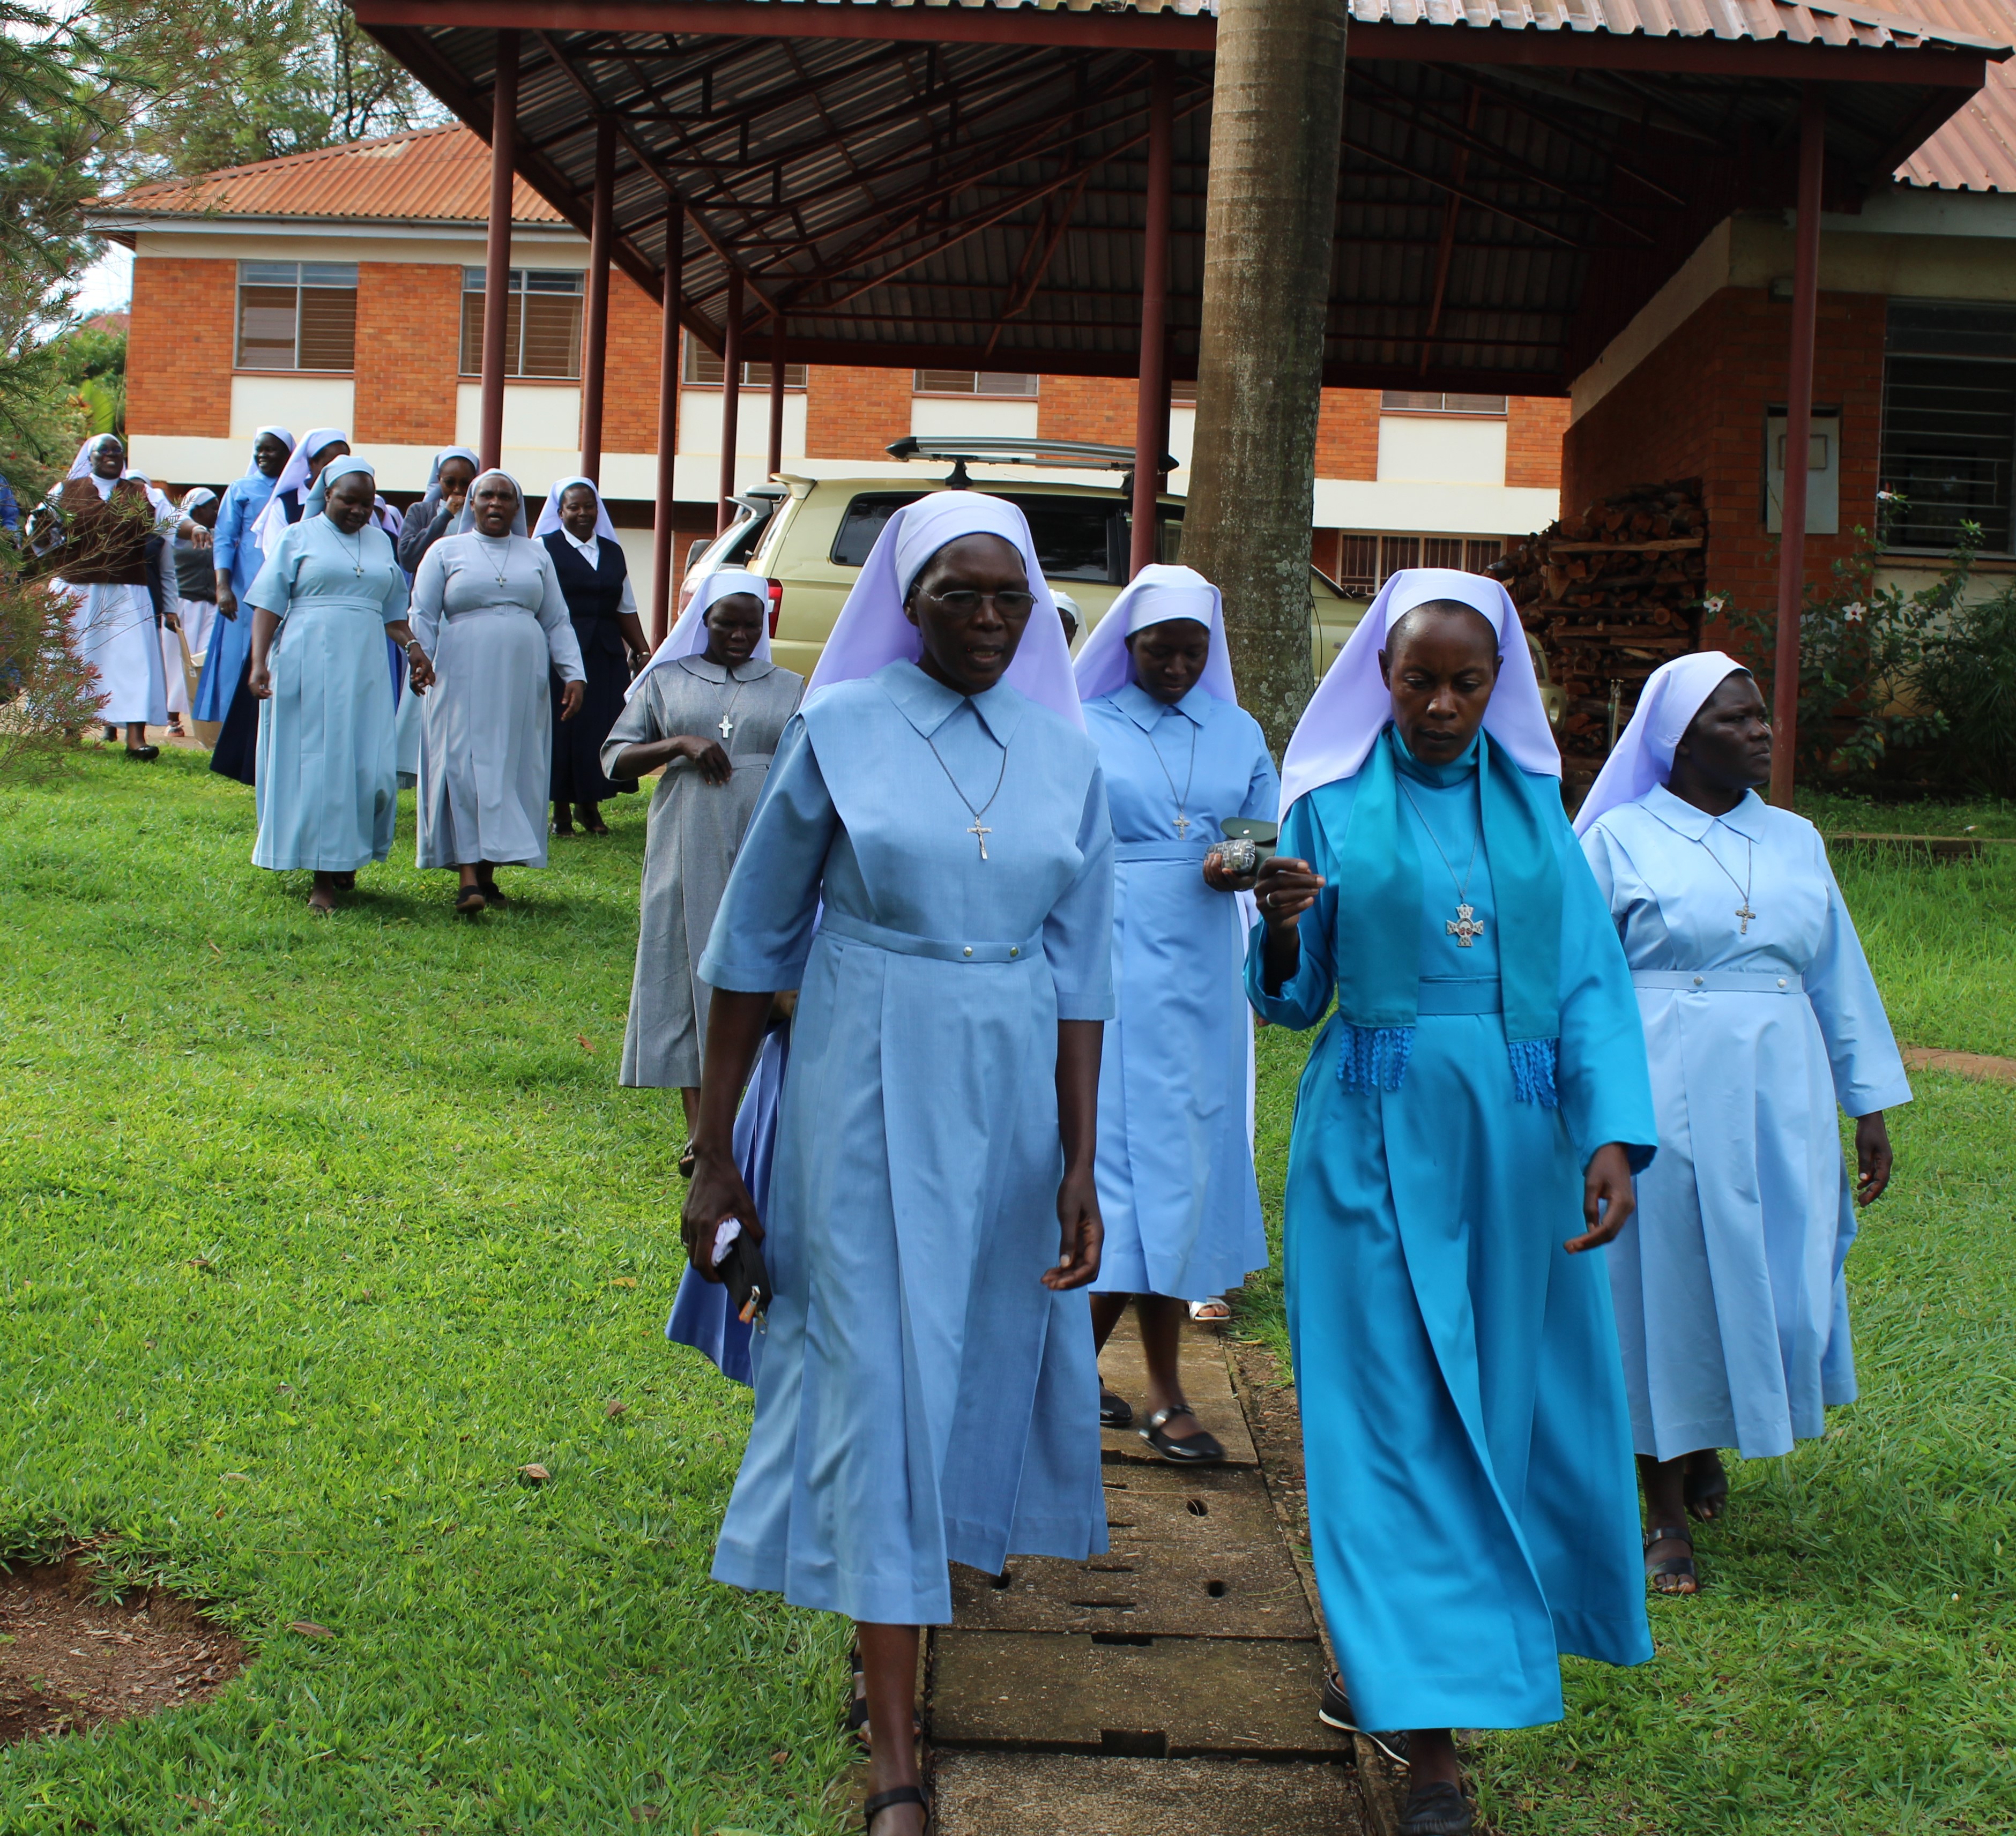 ASEC Sisters are pictured walking during a HESA Reflective Learning workshop in Uganda, 2022.